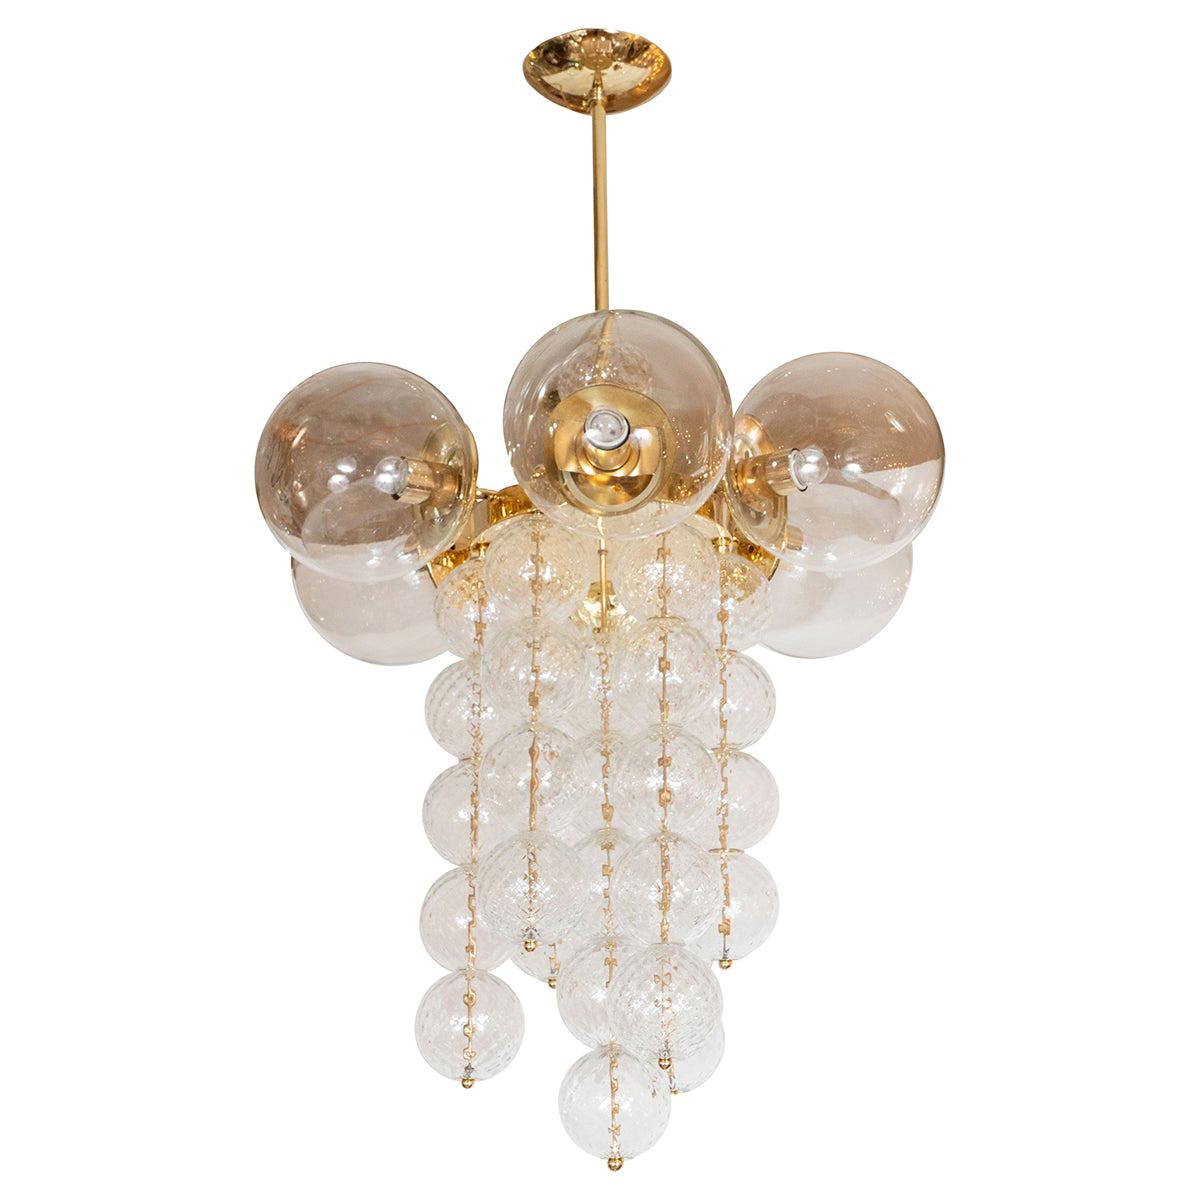 Brass Chandelier Composed of Multiple Clear and Textured Glass Ball Elements